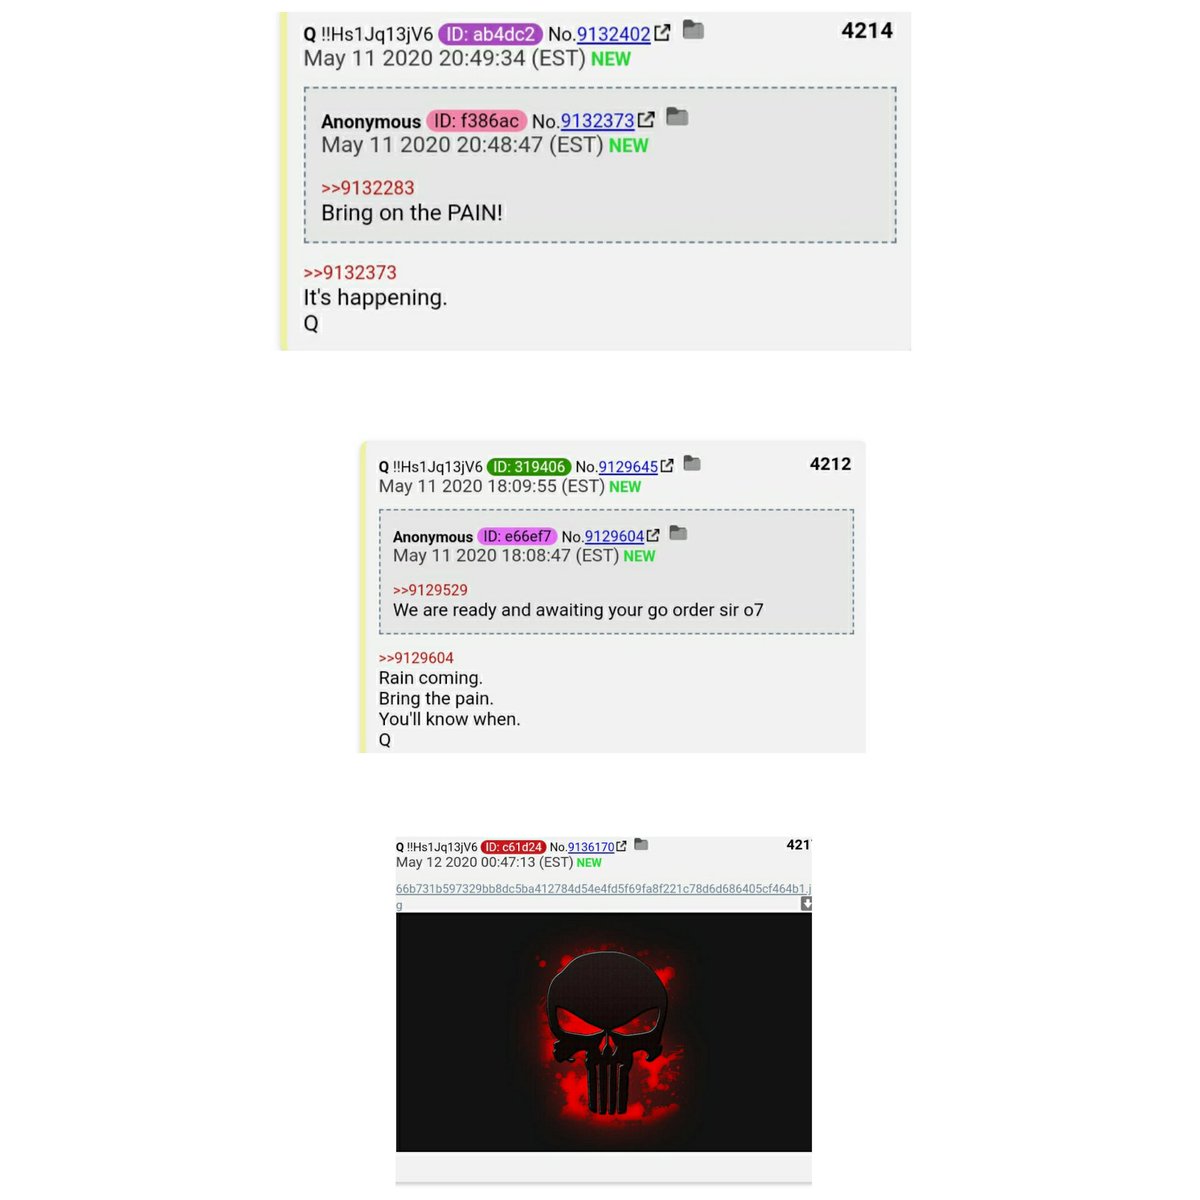  #QAnon mooh mooh incest pedo satanazi terrorist this is perfect pre-evidence you give out..  drowning a bit there?  do one more extreme selfdestructing move mooh mooh..  everyone has the cam ready..  be the evidence mooh mooh..  dont be shy..  feel comfy and safe.. 